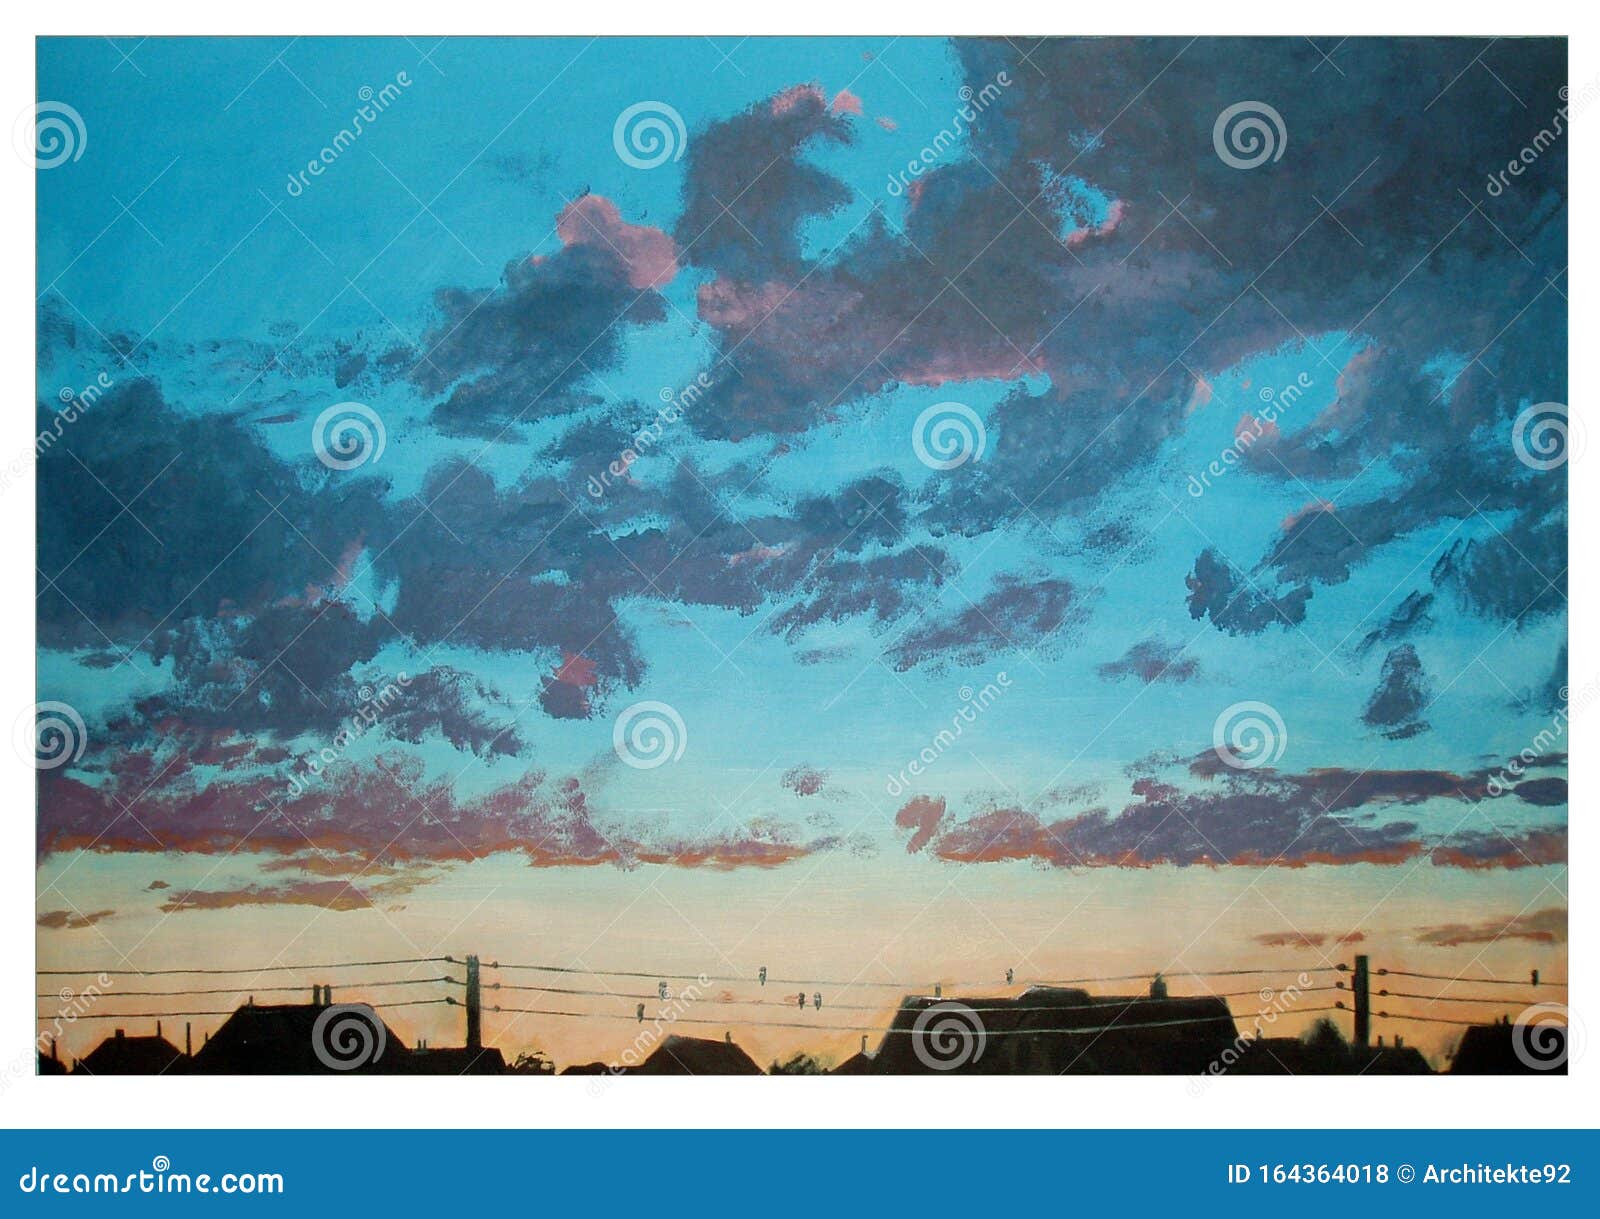 Acrylic Painting Of A Sunset Sky Stock Illustration Illustration Of Acrylic Painting